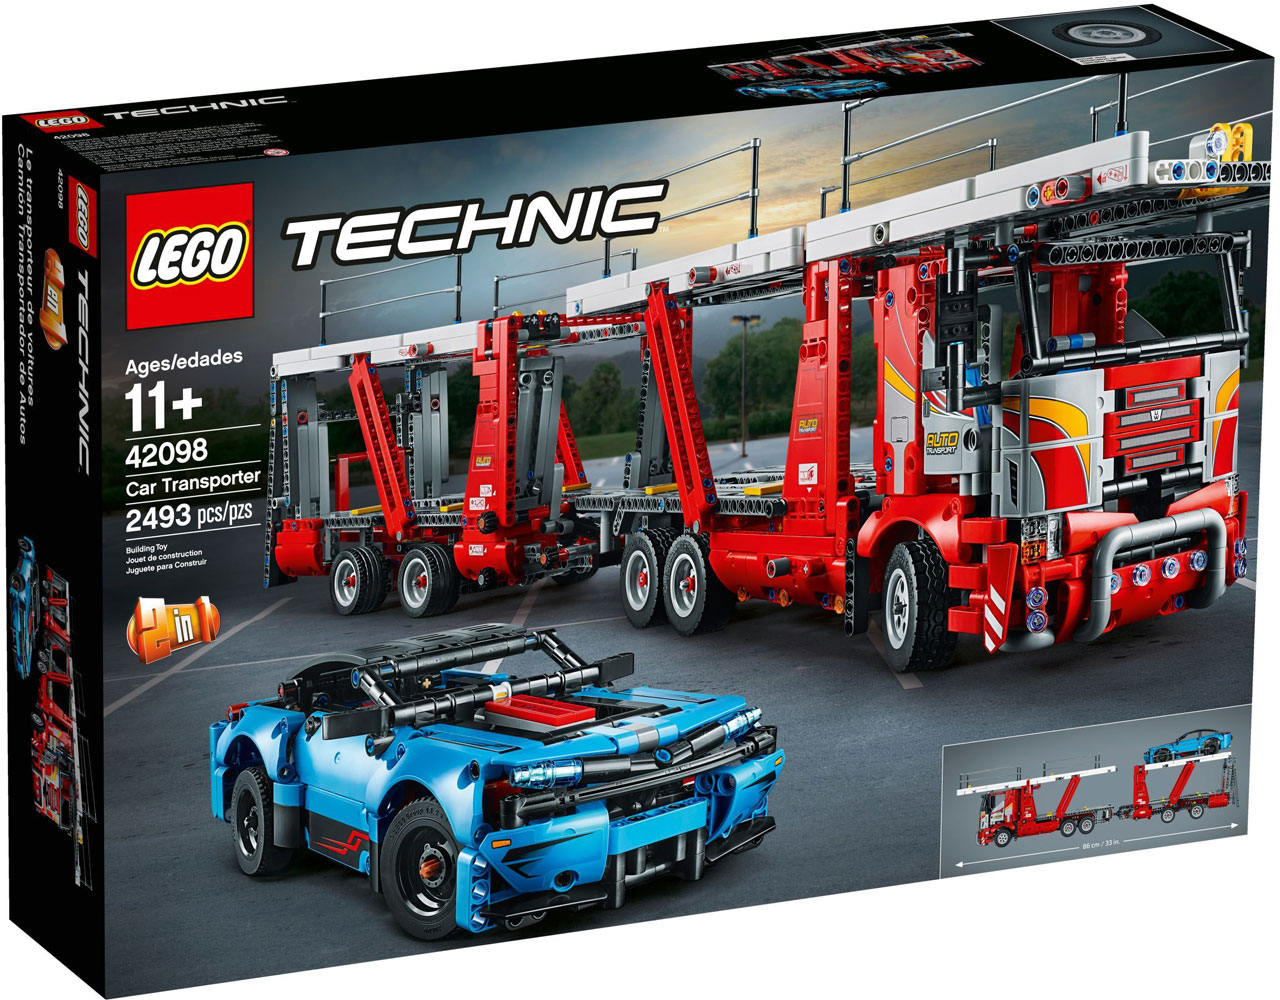 LEGO® Technic review: 42098 Car Transporter (part 2) Elementary: LEGO® parts, sets and techniques